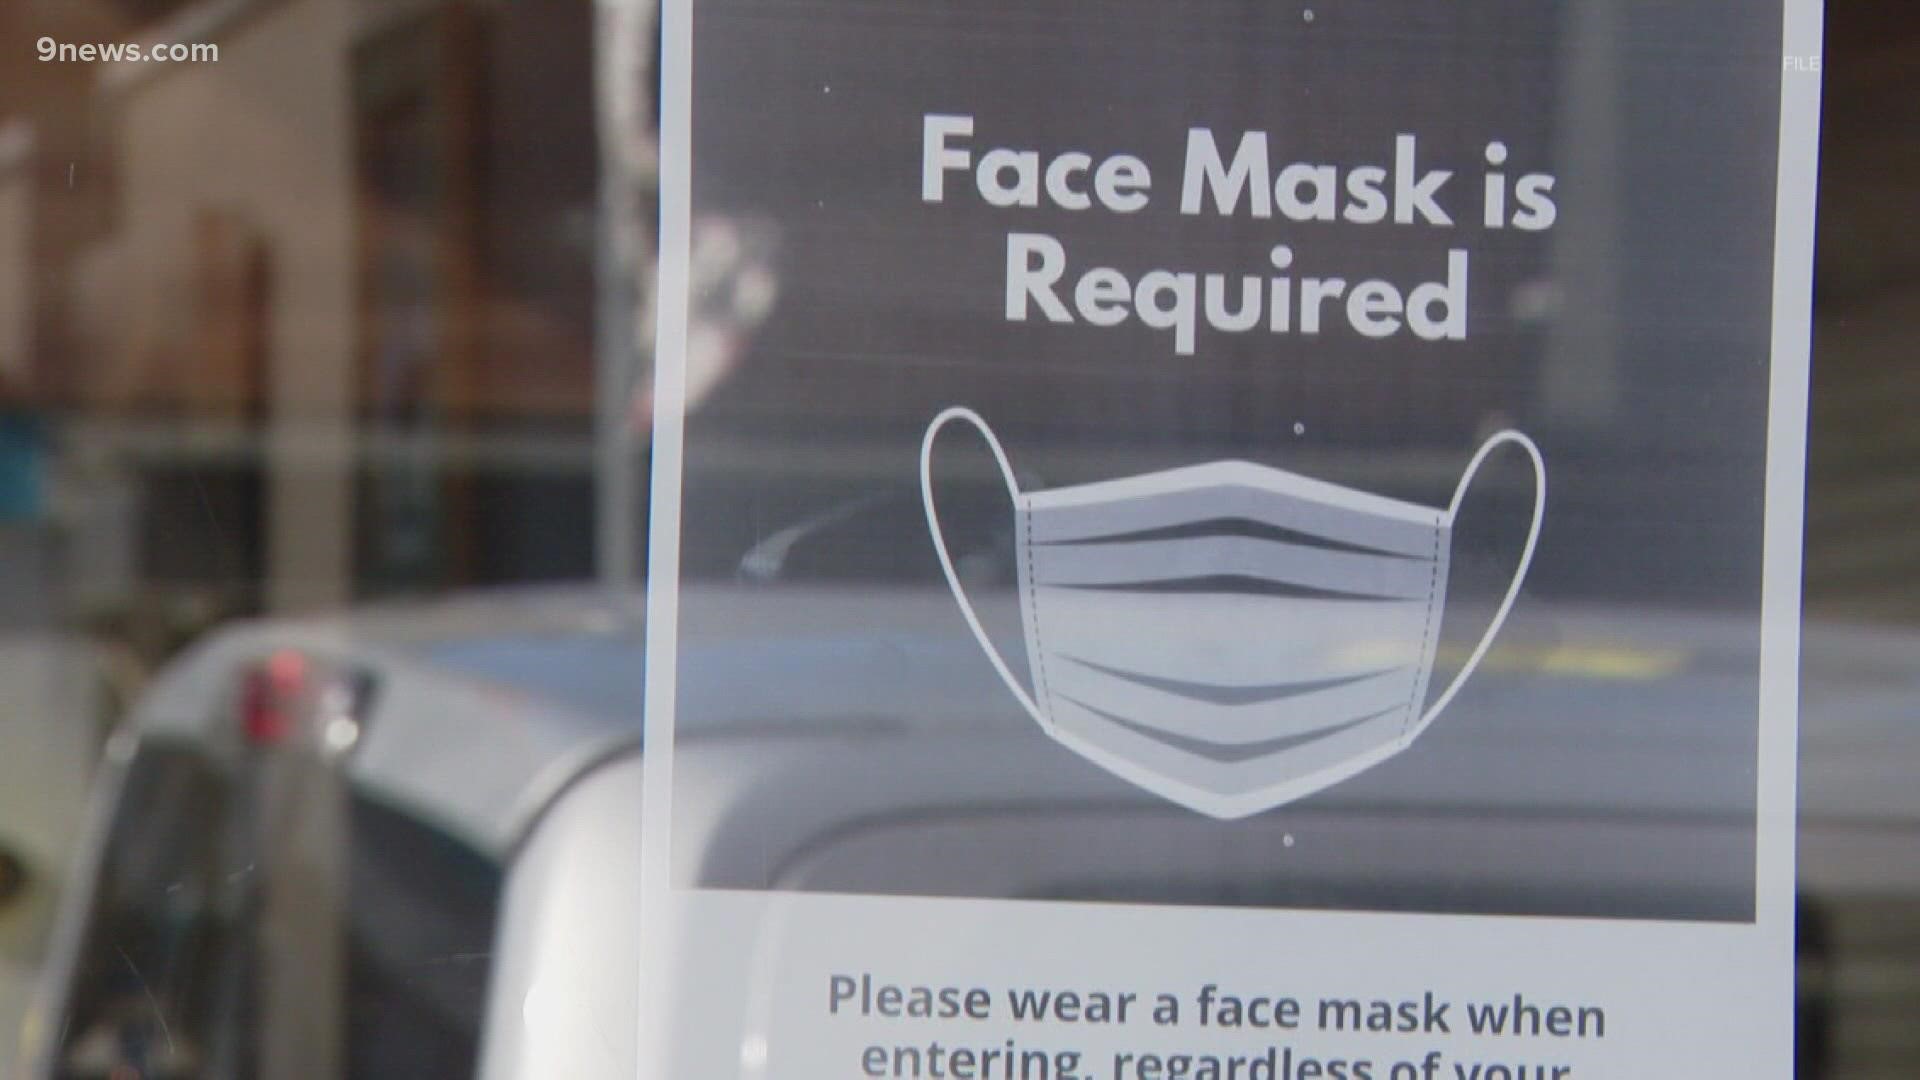 Starting Wednesday, masks will be required in all indoor public spaces in Jefferson, Adams and Arapahoe counties.